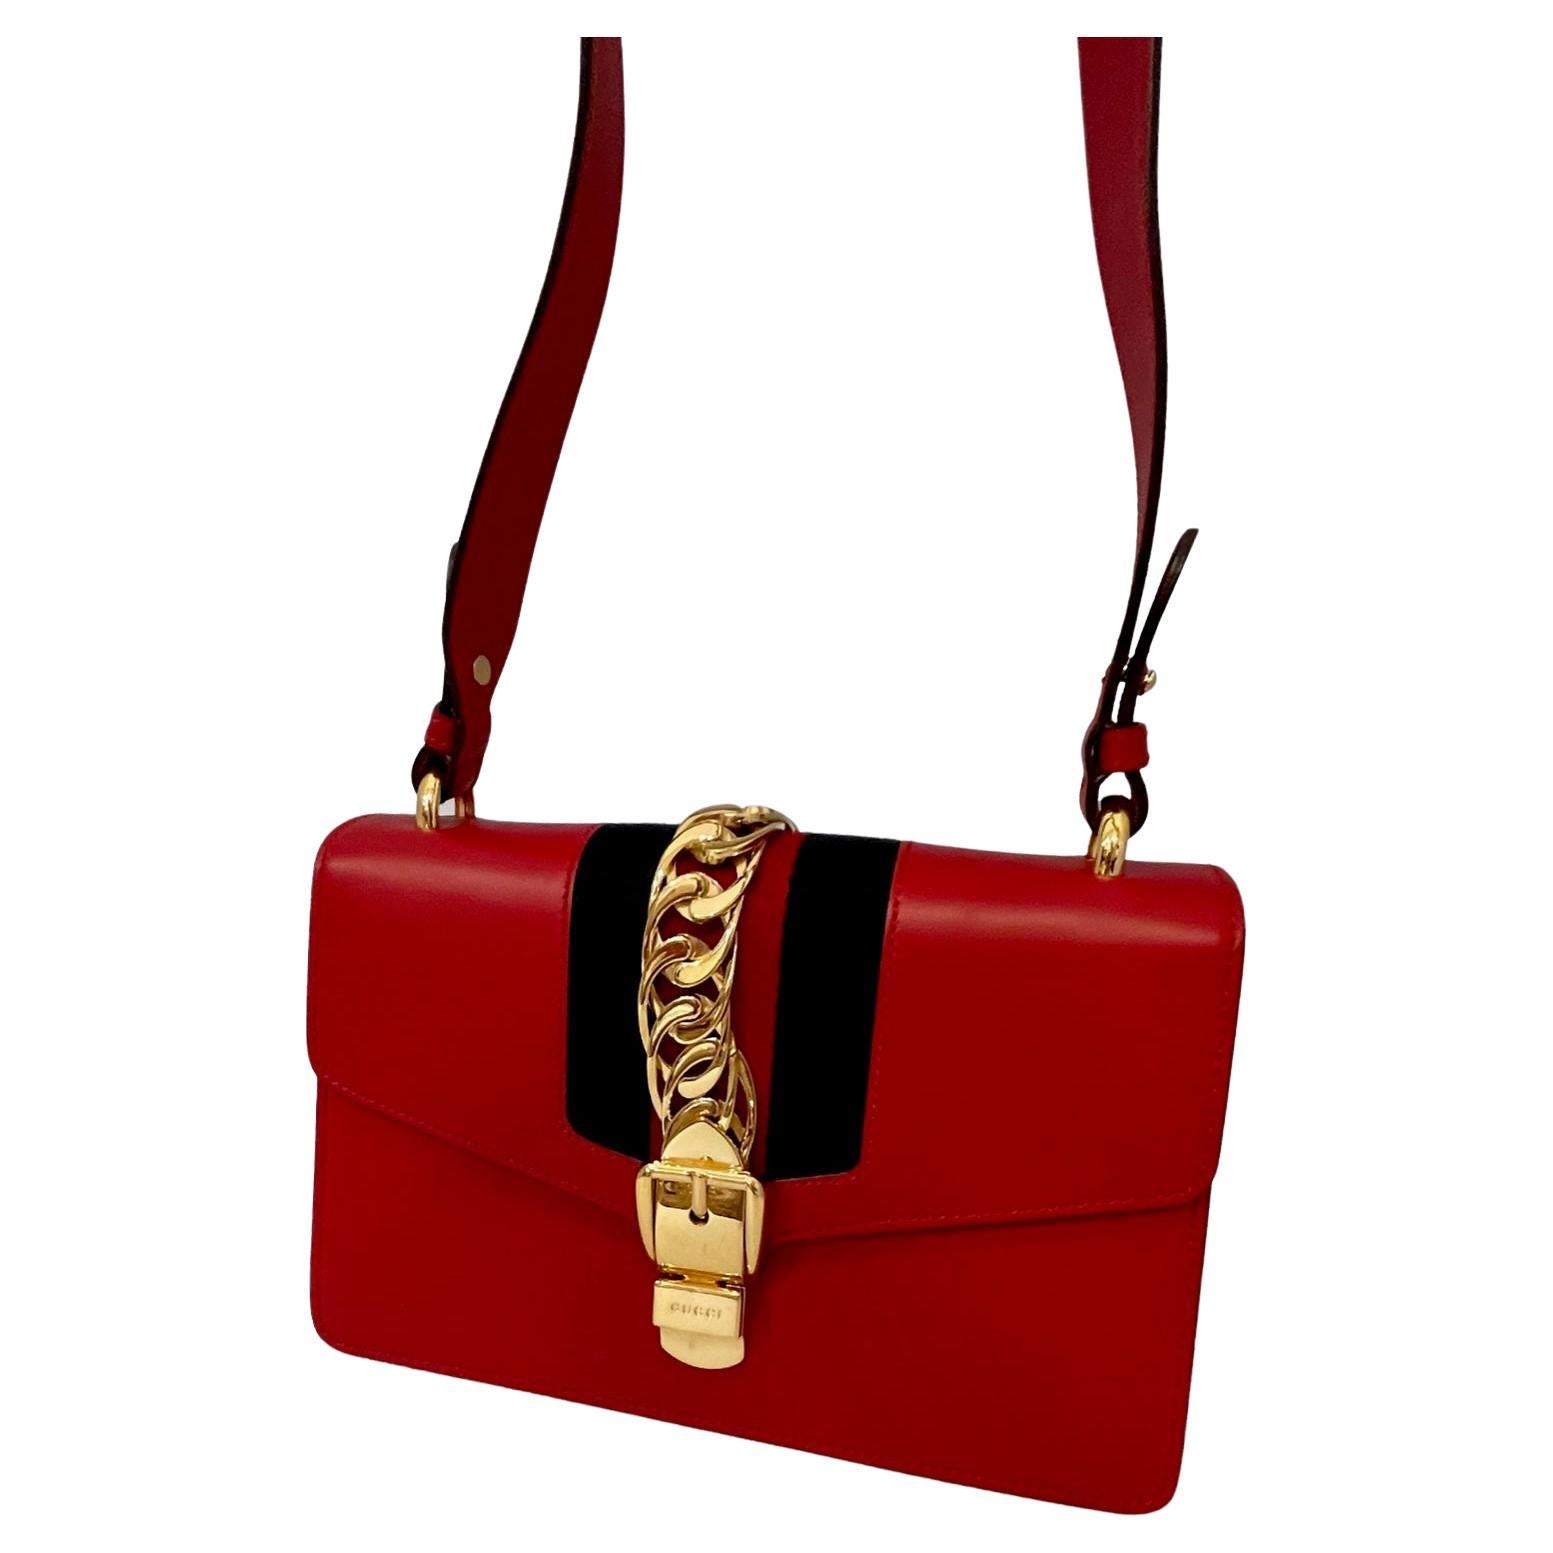 Special Occasion · Genuine Leather · Nylon · Reds
This is an authentic GUCCI Calfskin Maxi Sylvie in Red. This structured clutch is crafted of smooth red calfskin leather and features a prominent front flap detailed with a central nylon red and blue